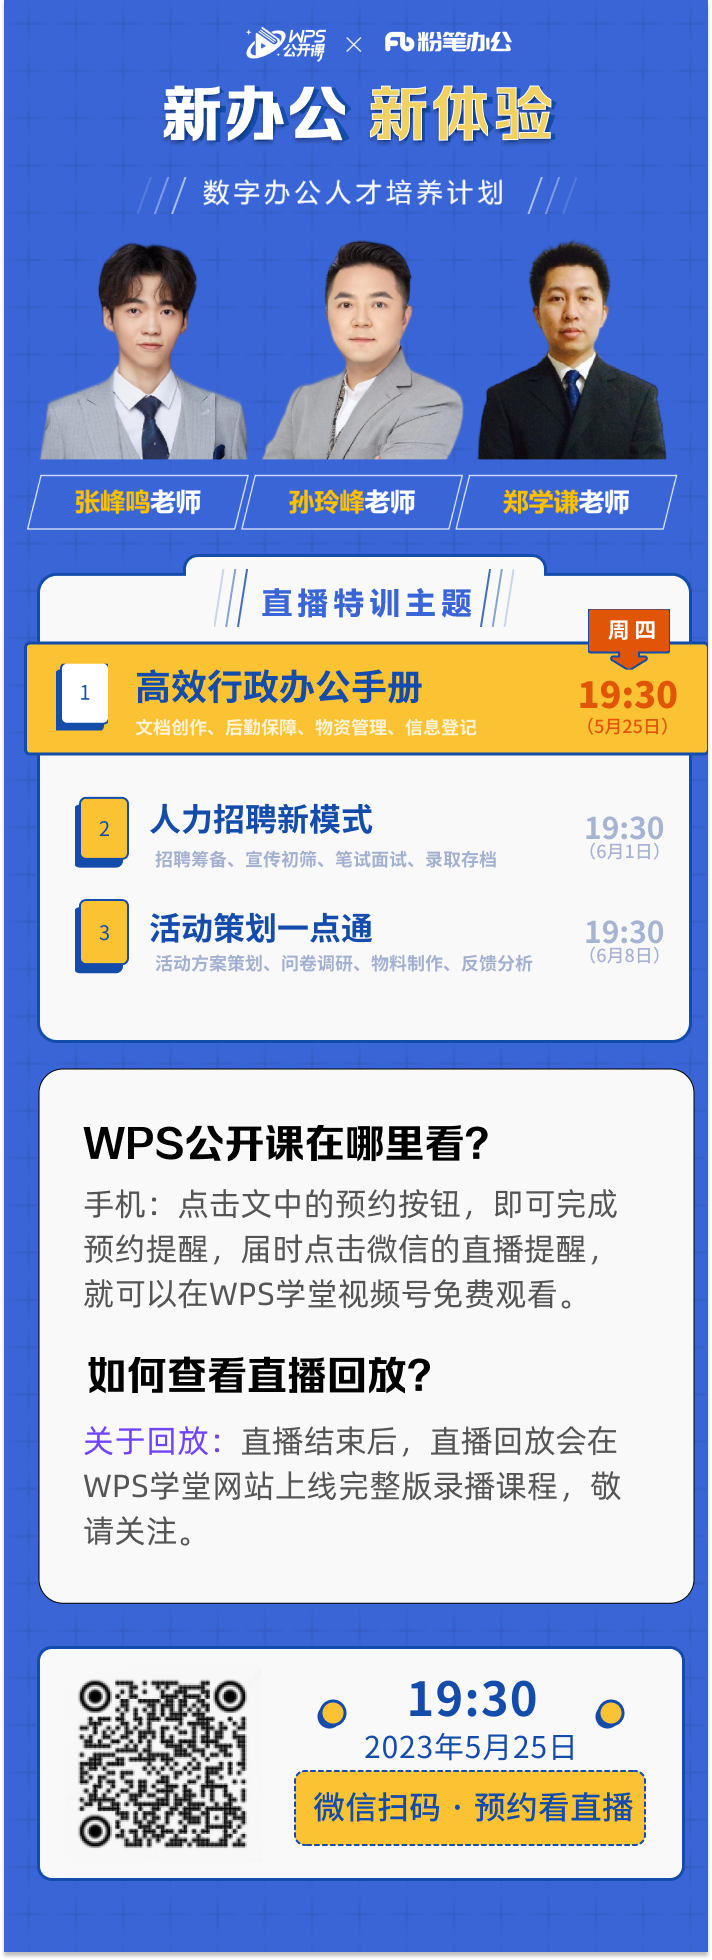 WPS公开课政企1-3.png